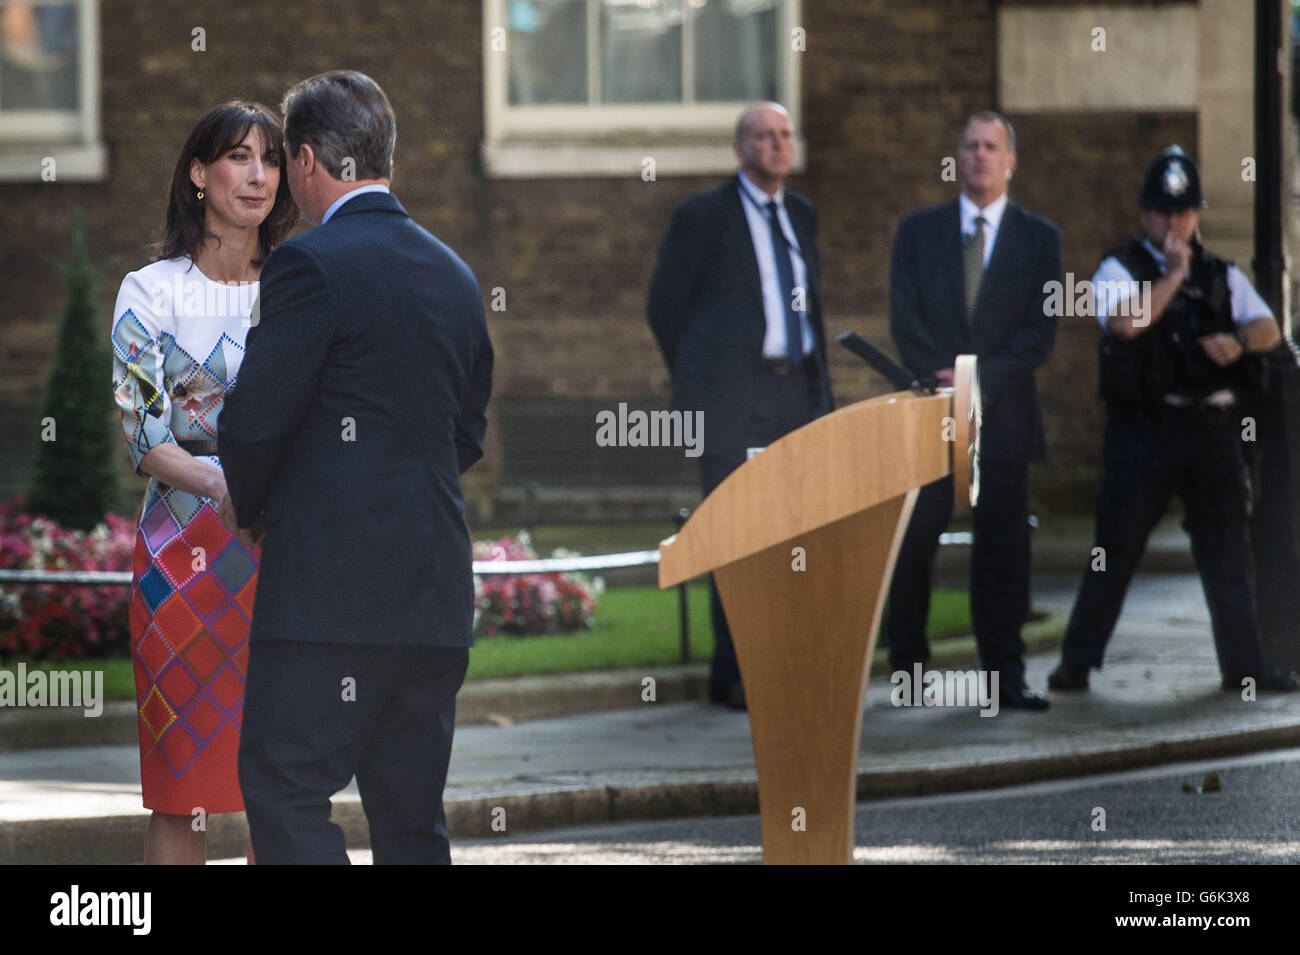 Prime Minister David Cameron with wife Samantha outside 10 Downing Street, London, where he announced his resignation after Britain voted to leave the European Union in an historic referendum which has thrown Westminster politics into disarray and sent the pound tumbling on the world markets. Stock Photo